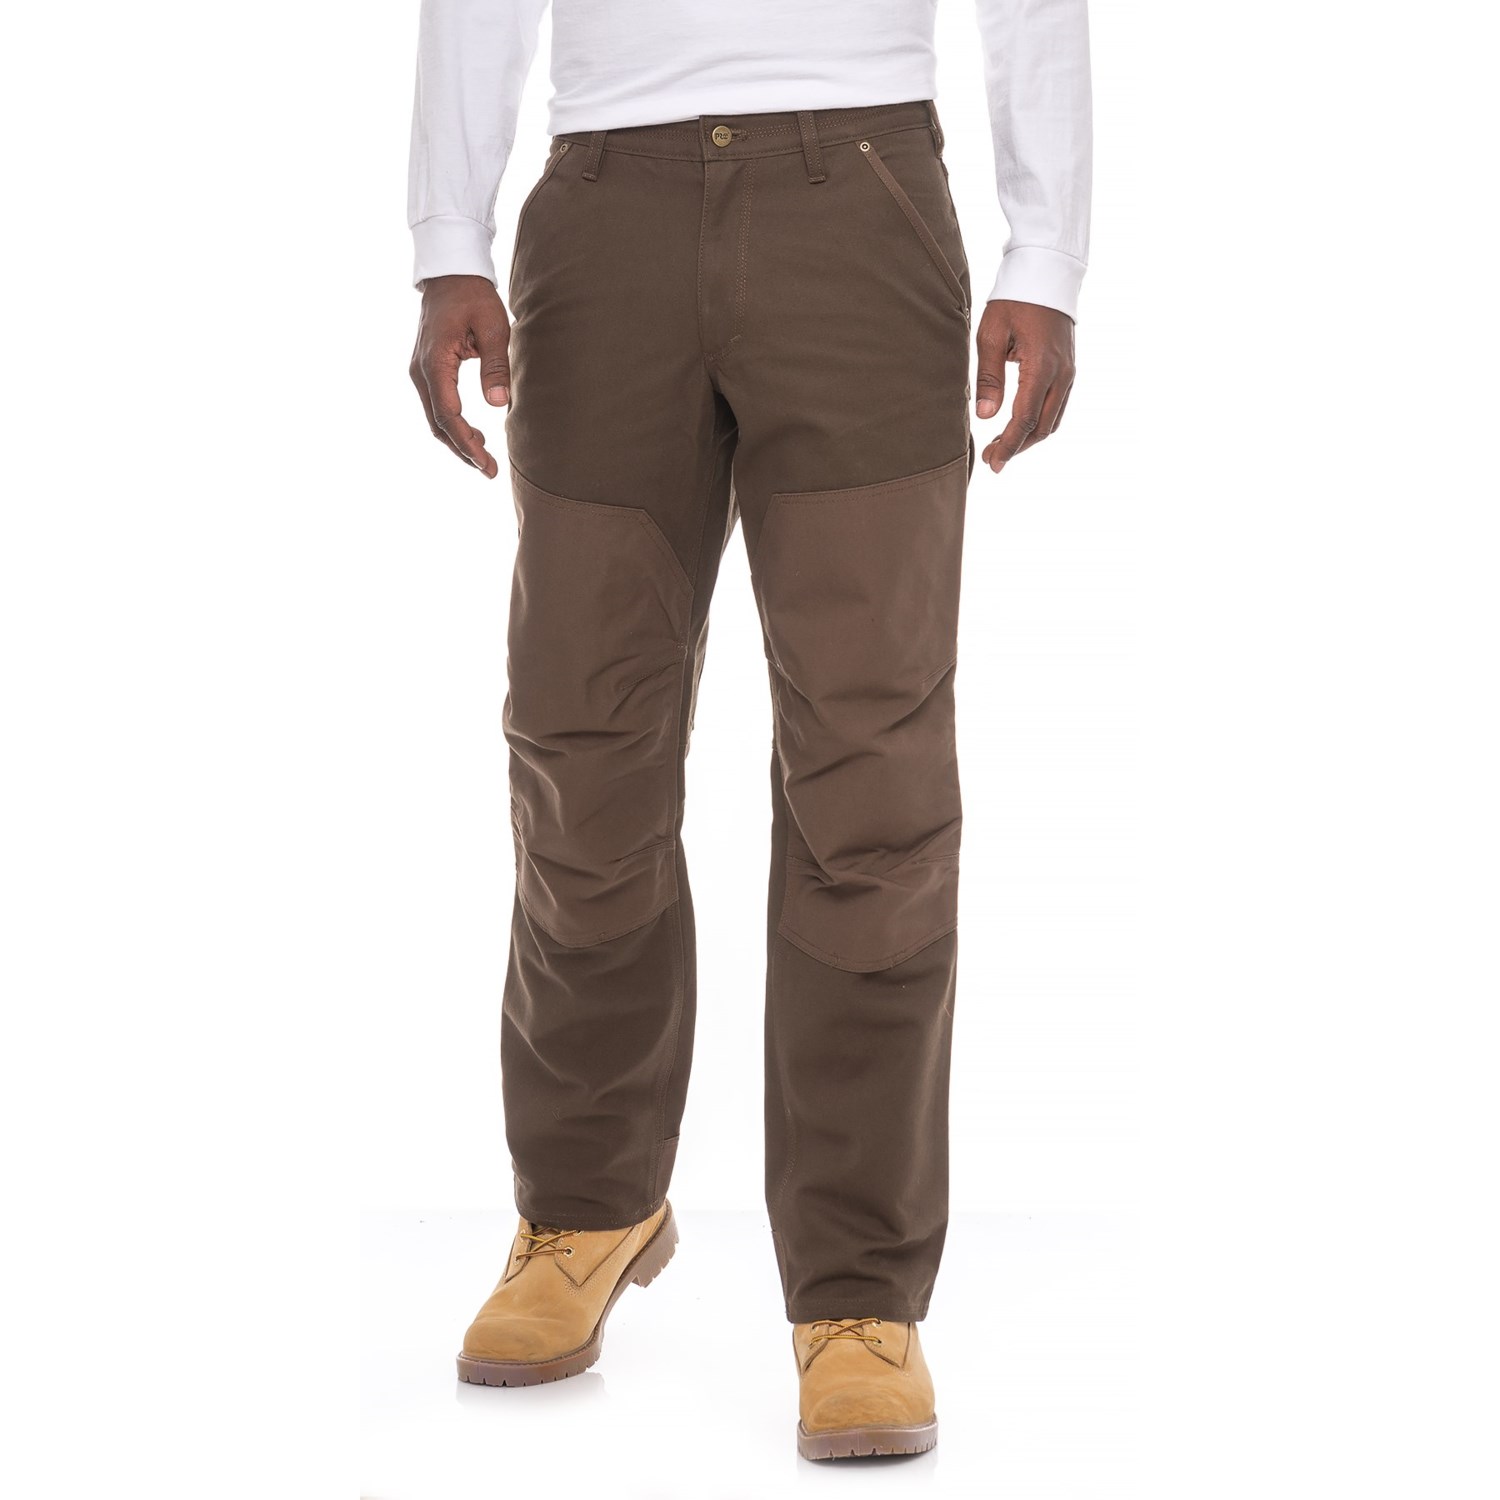 Timberland PRO Son-of-a-Pant Classic Work Pants (For Men)